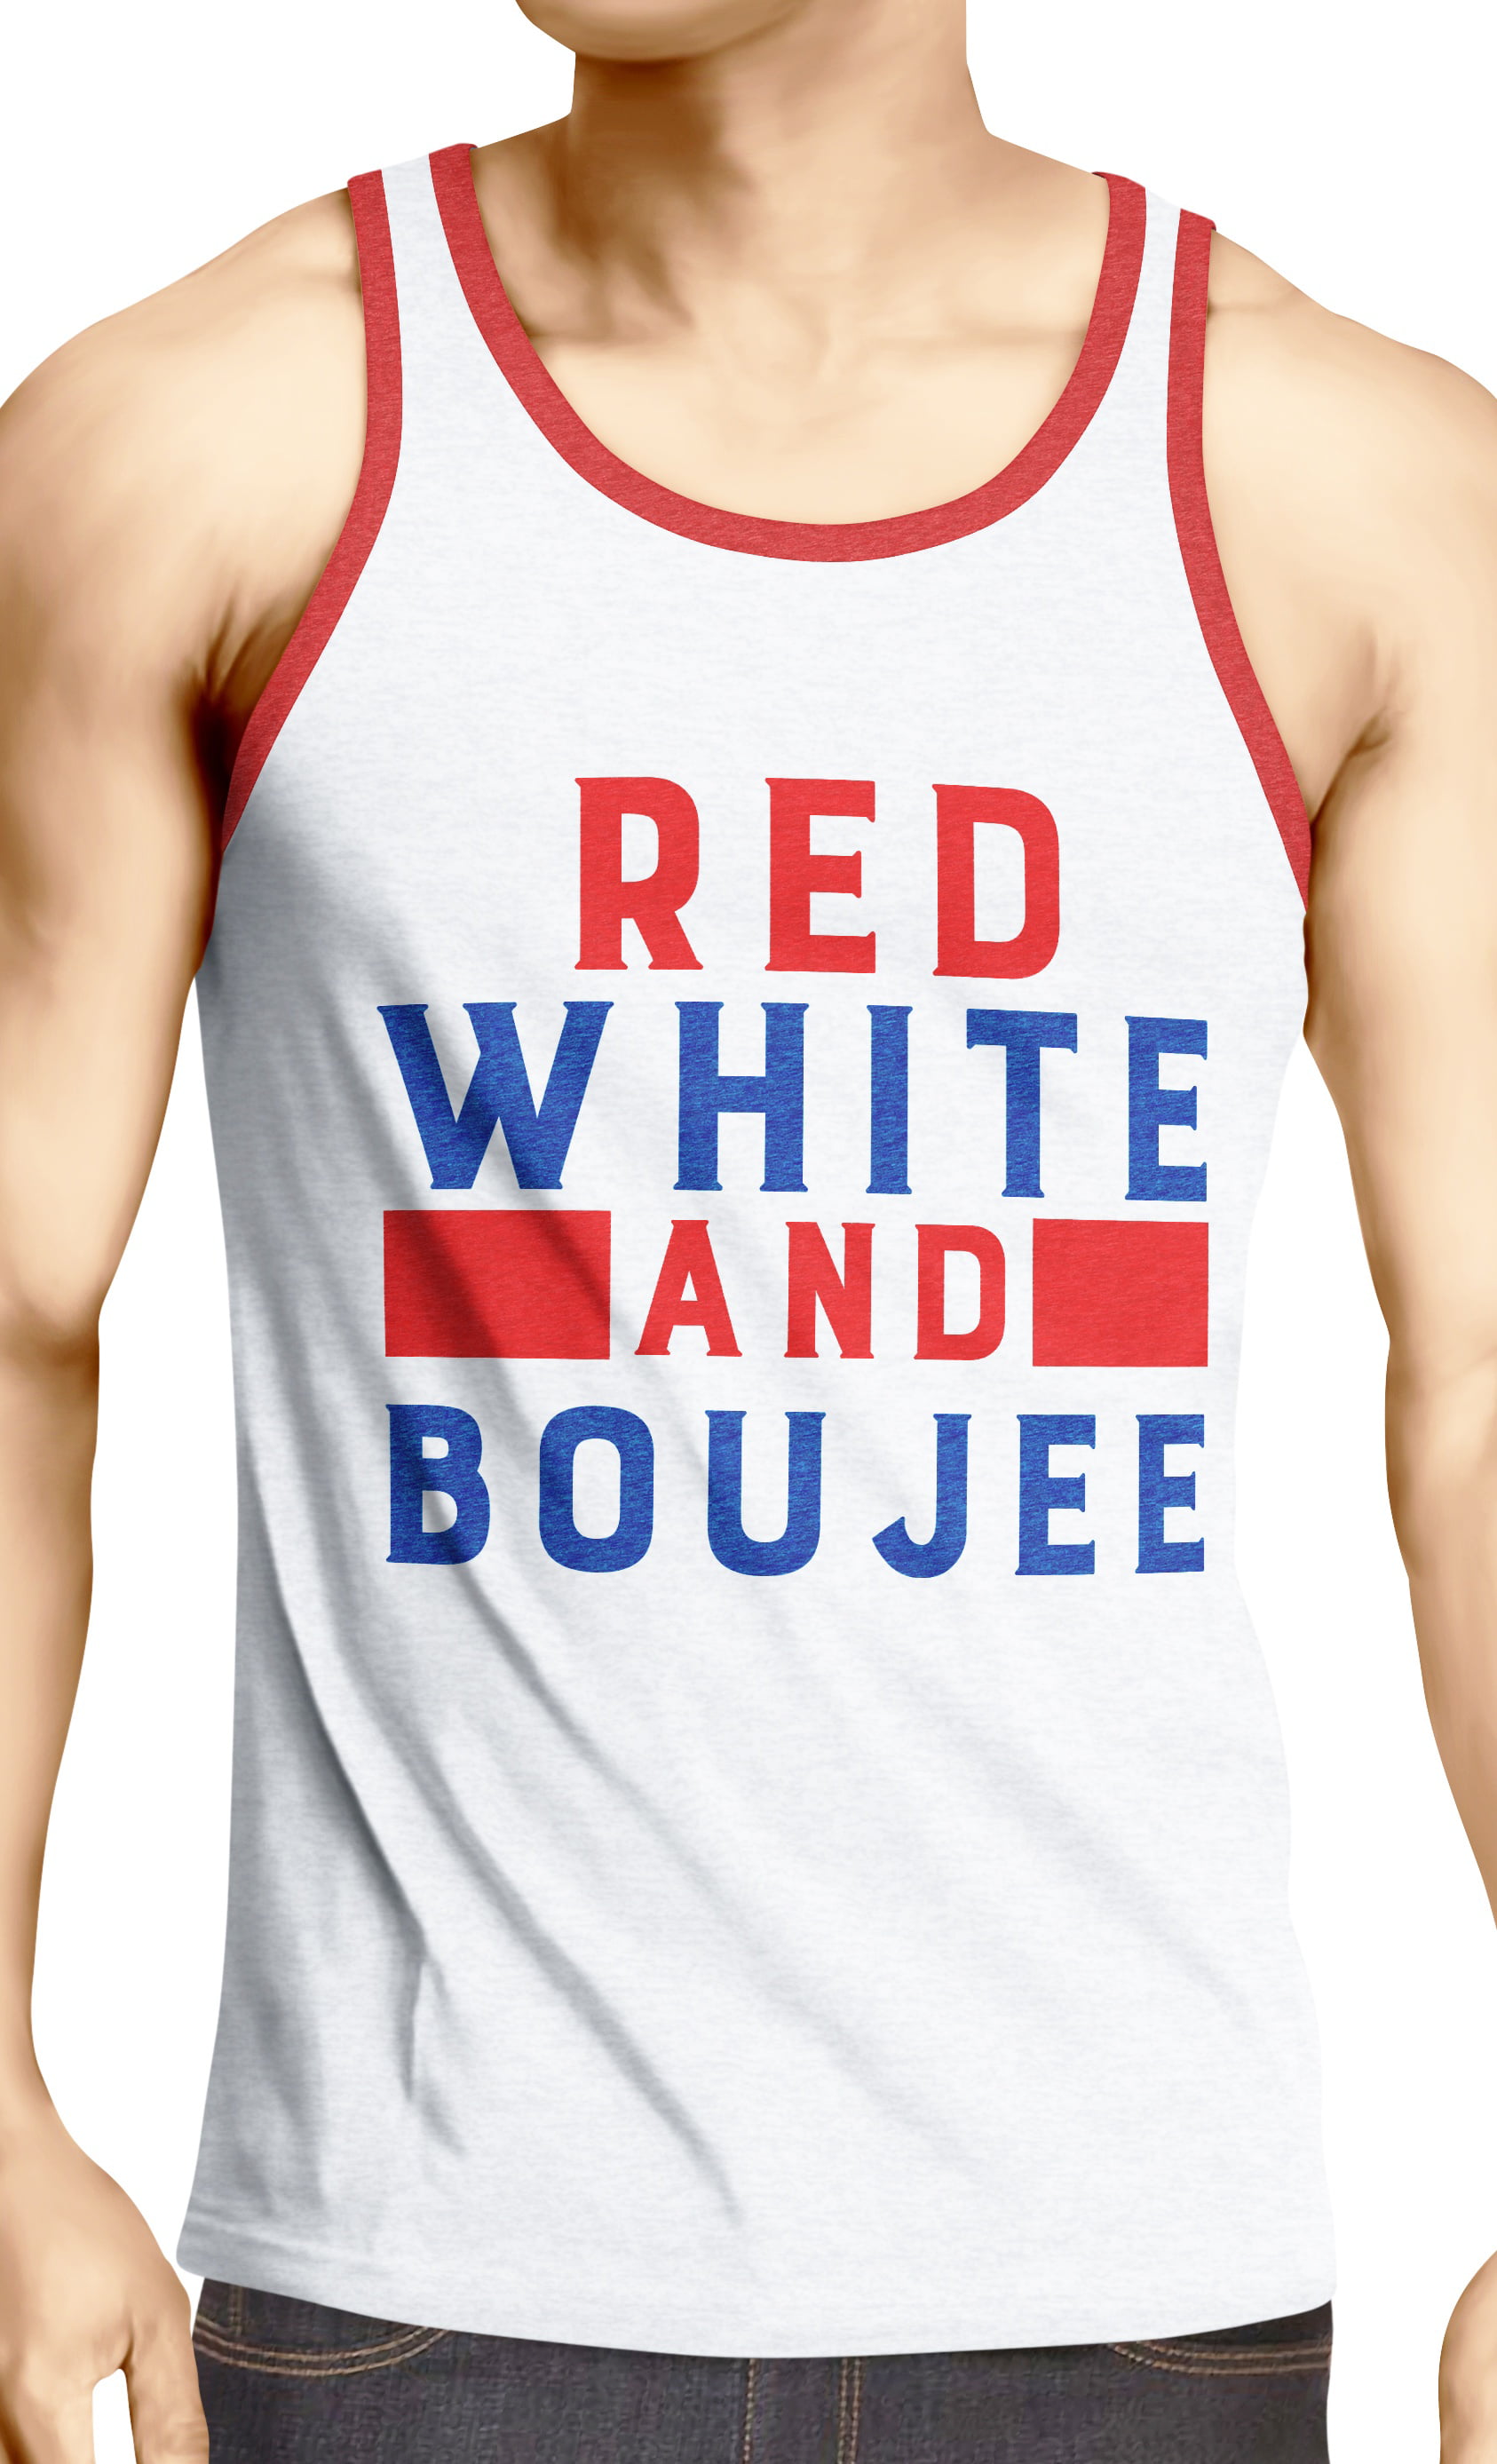 red white and boujee shirt